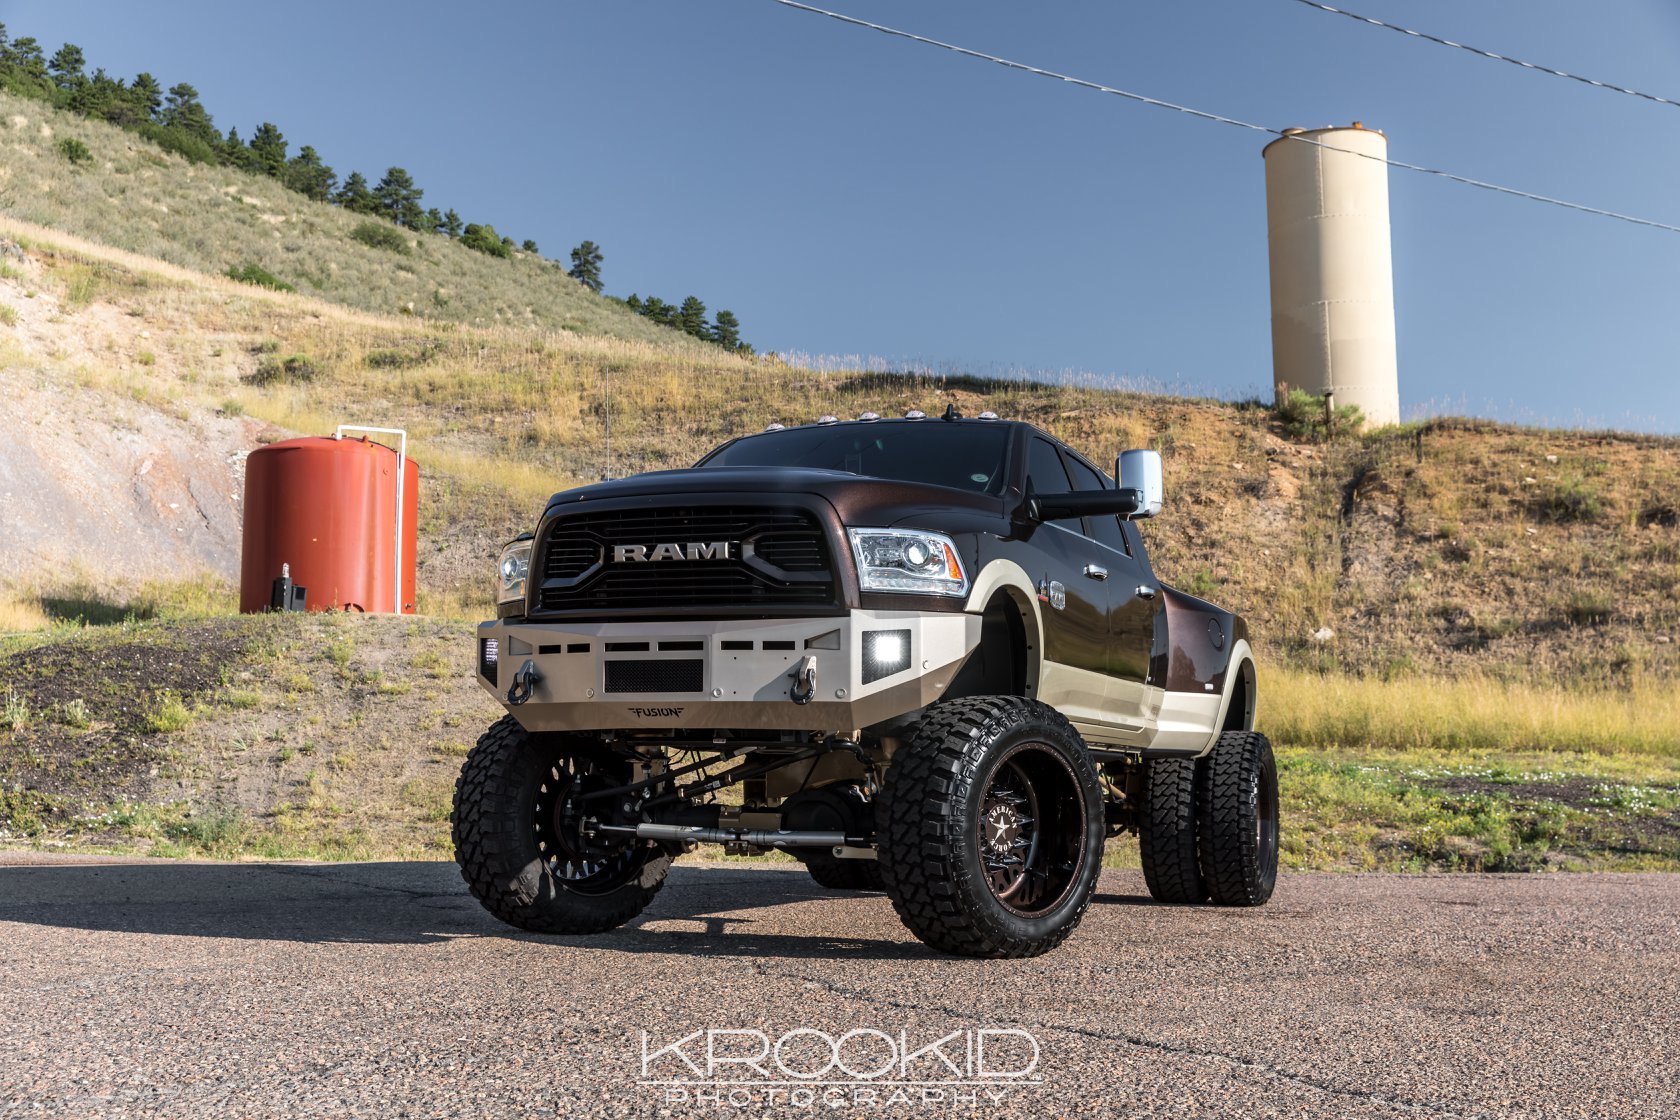 Custom Projector Headlights on Brown Lifted Dodge Ram - Photo by Krookid Photography